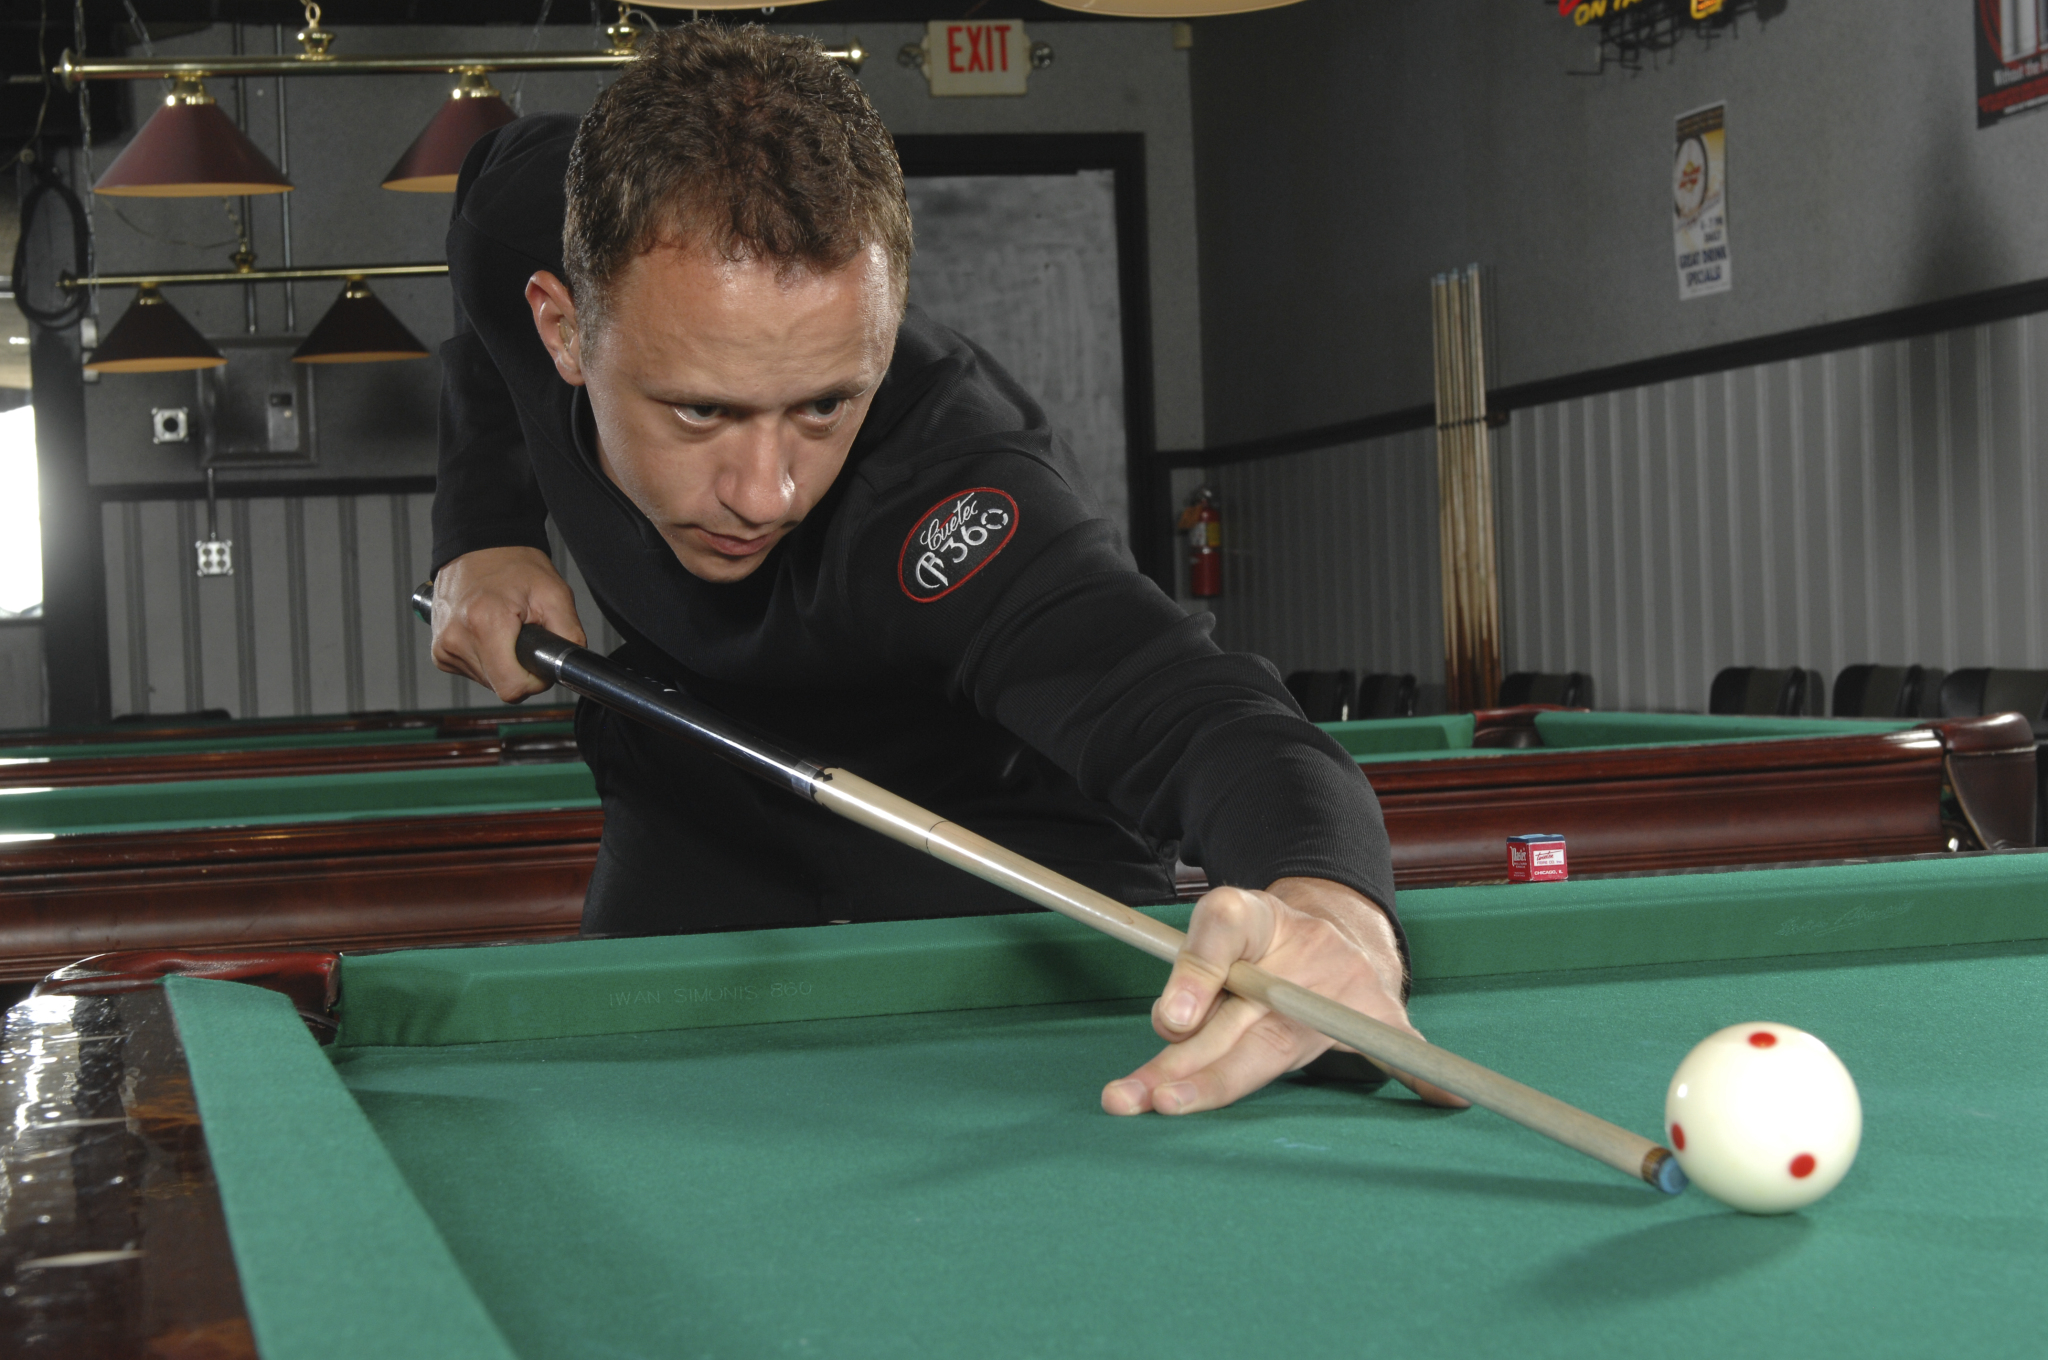 How To Hold A Pool Cue